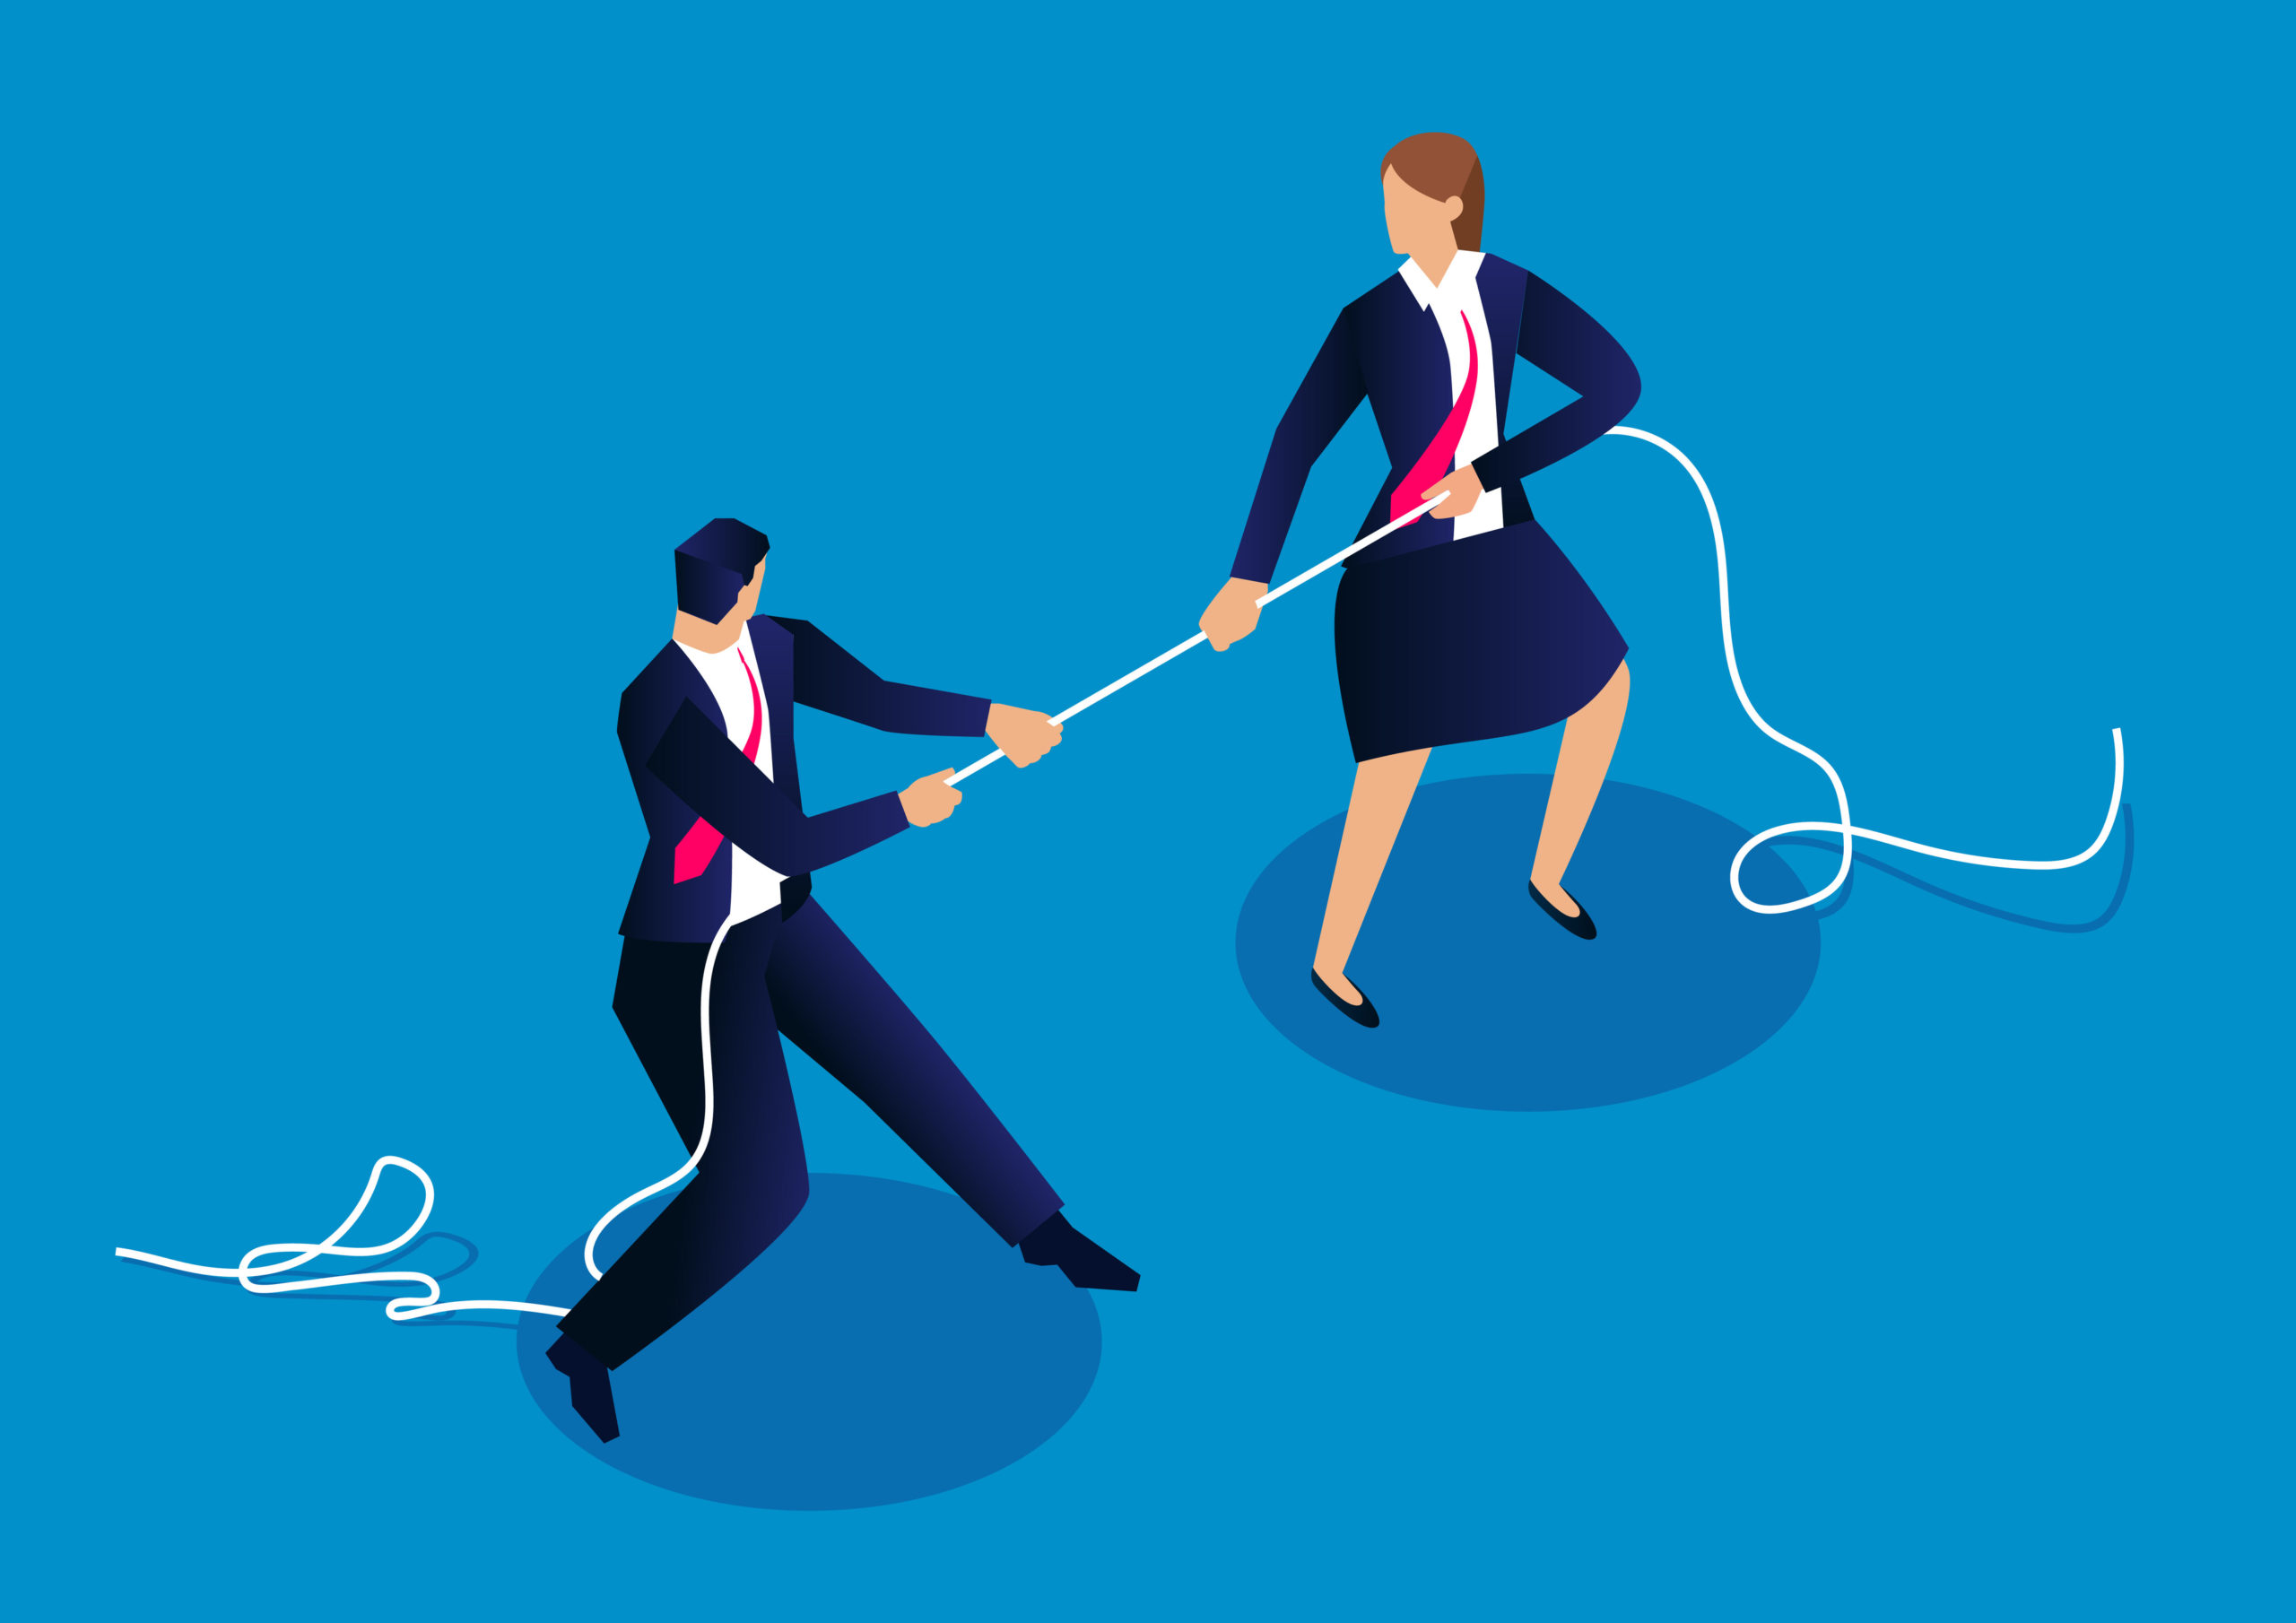 Marketing and sales tug-of-war over intent data